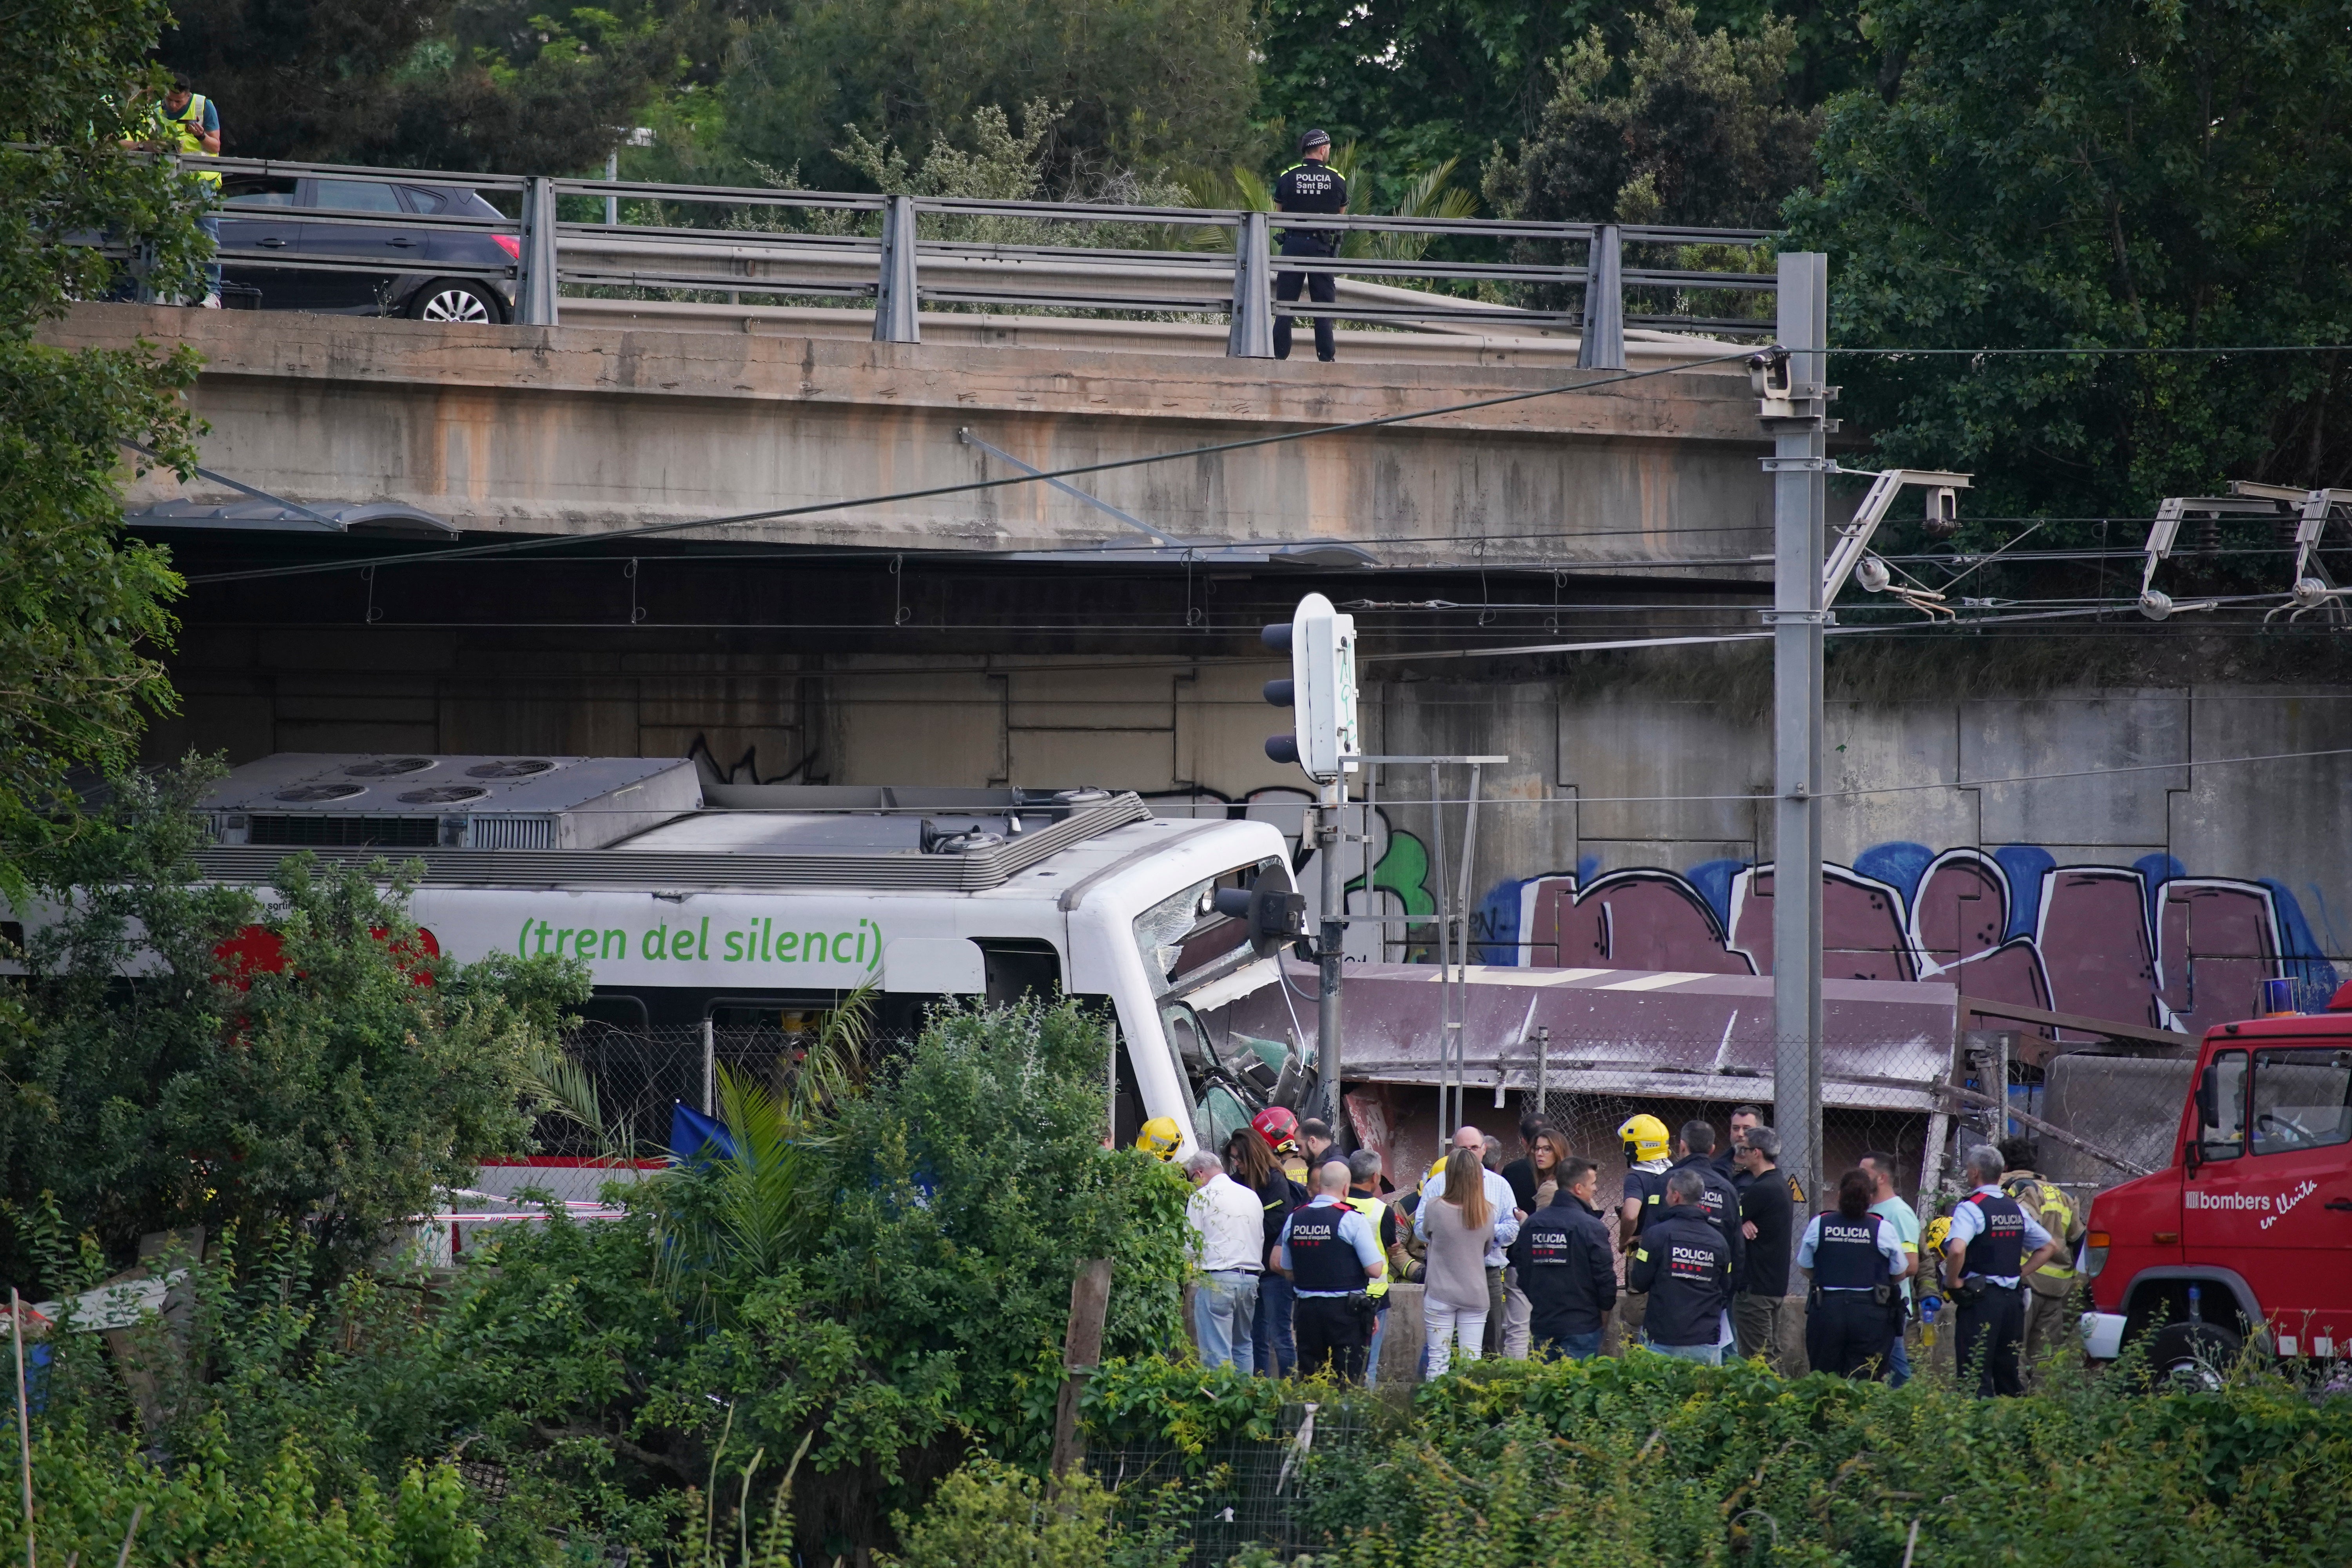 Police and rescue workers stand by the wreckage after a train crash in Sant Boi near Barcelona